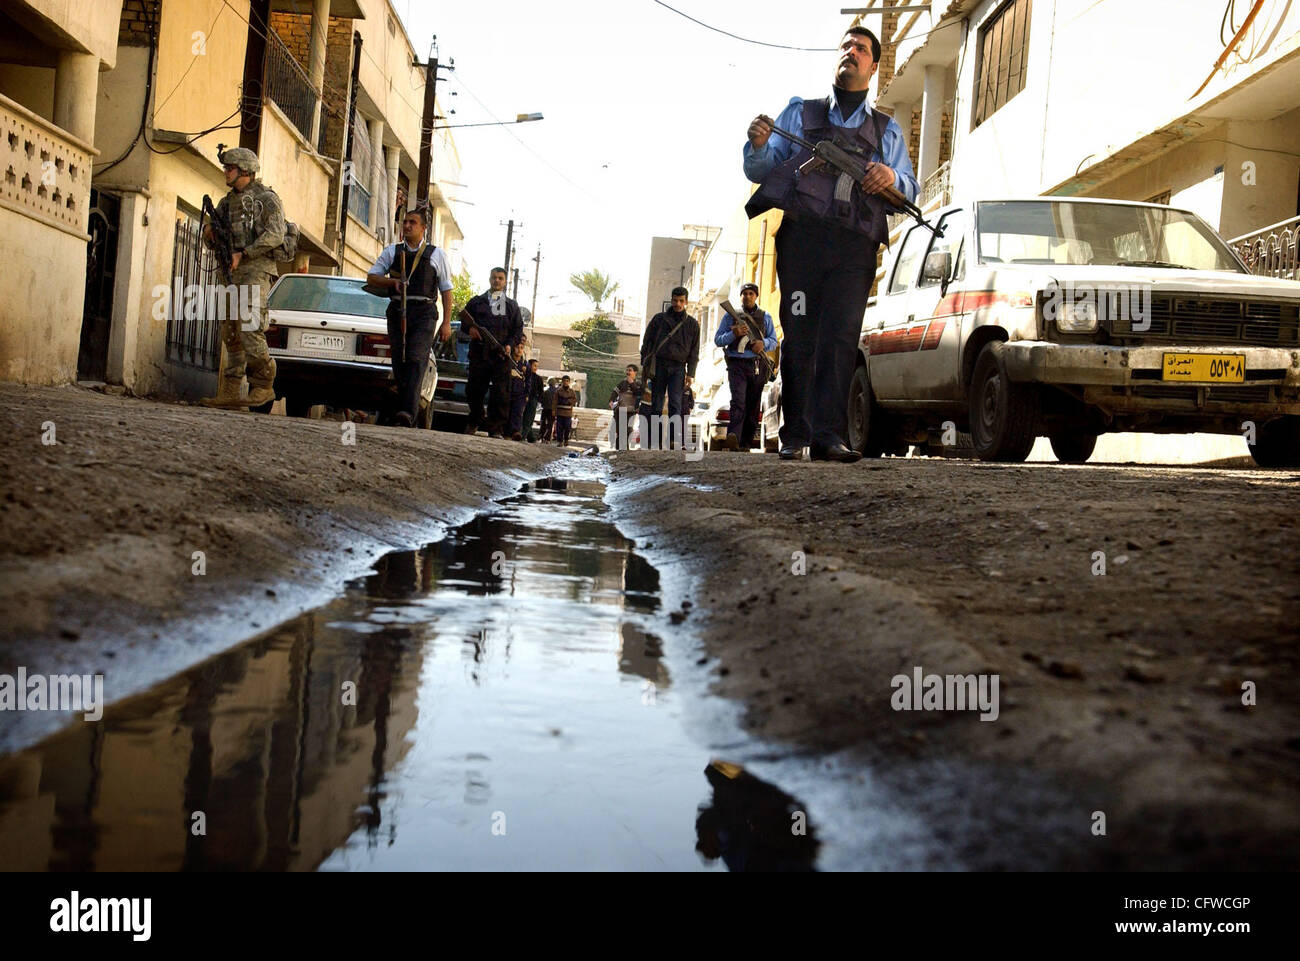 Feb 20, 2007 - Baghdad, Iraq - Iraq police officers and paratroopers, from the 82nd Airborne Division, walk down an alley as they do a joint patrol in the Al-Sulakh neighborhood. The 82nd's 2nd Brigade Combat Team was 'surged' into Baghdad last month as the Bush Administration unveiled its new strat Stock Photo